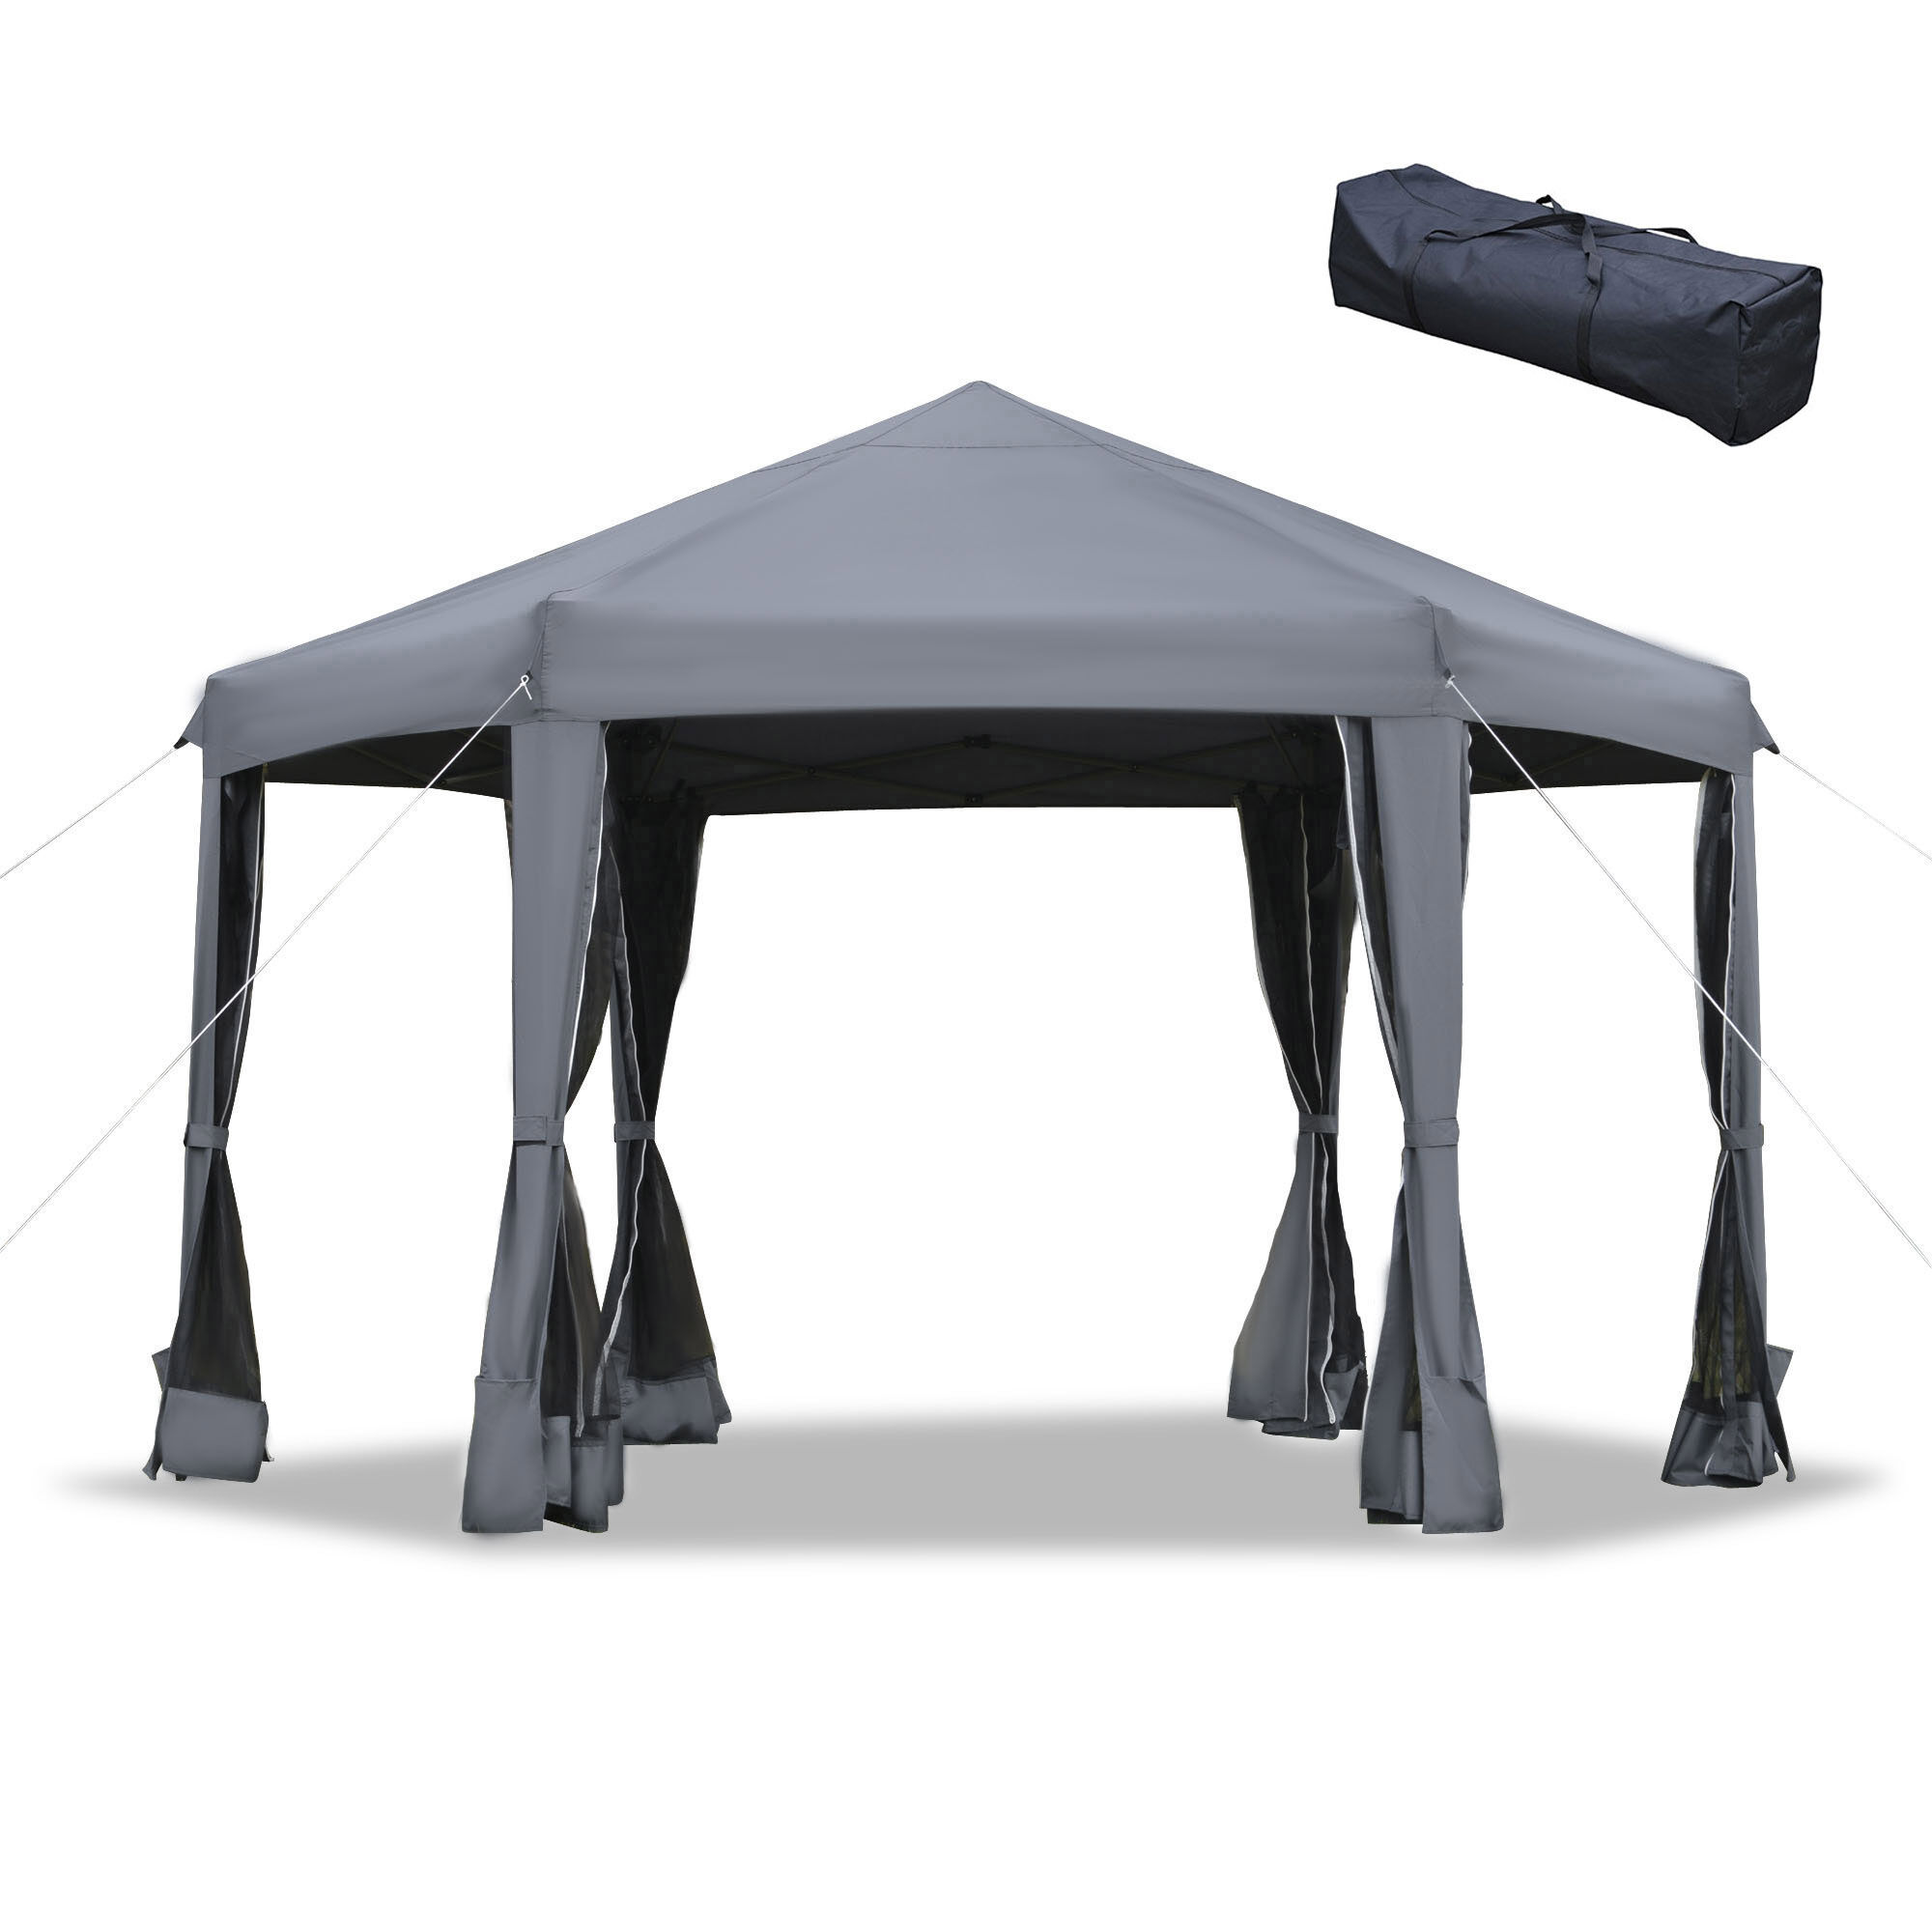 Outsunny 13' x 13' Heavy Duty Pop Up Canopy with Hexagonal Shape, 6 Mesh Sidewall Netting, 3-Level Adjustable Height and Strong Steel Frame, Grey